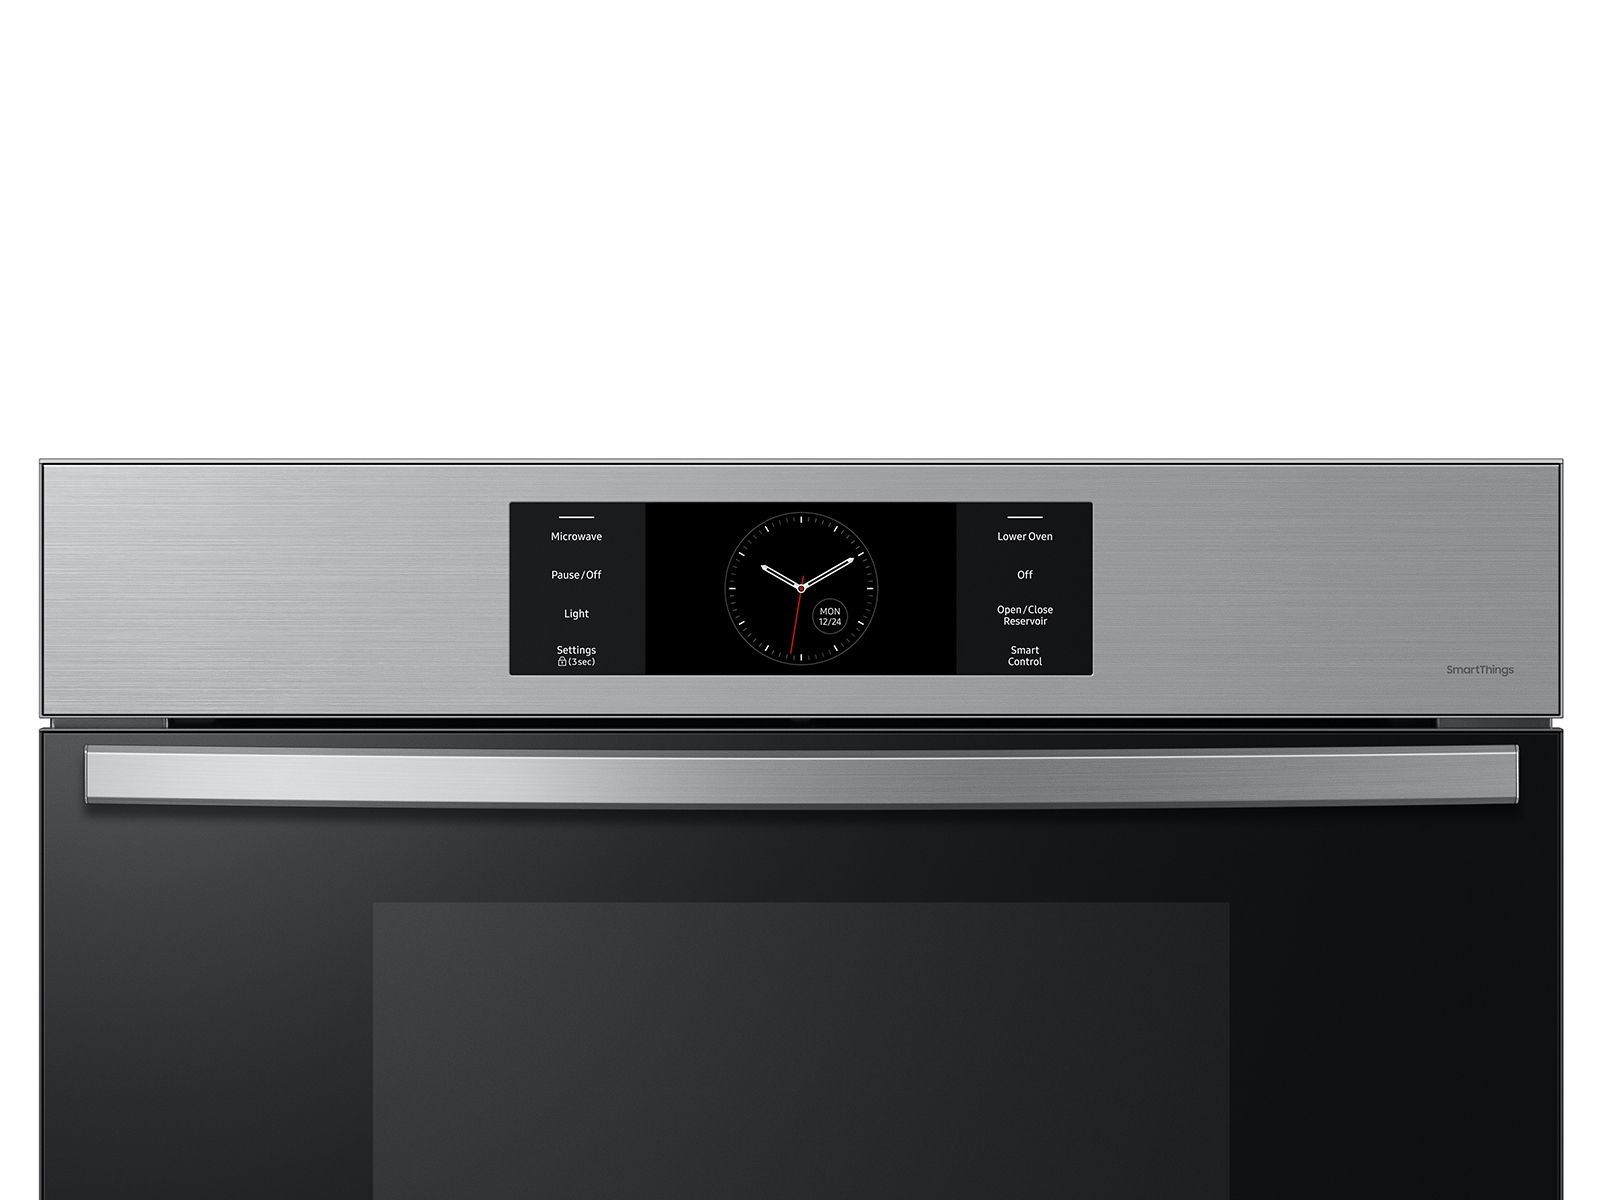 Smart Built-in Wall Ovens, Samsung US